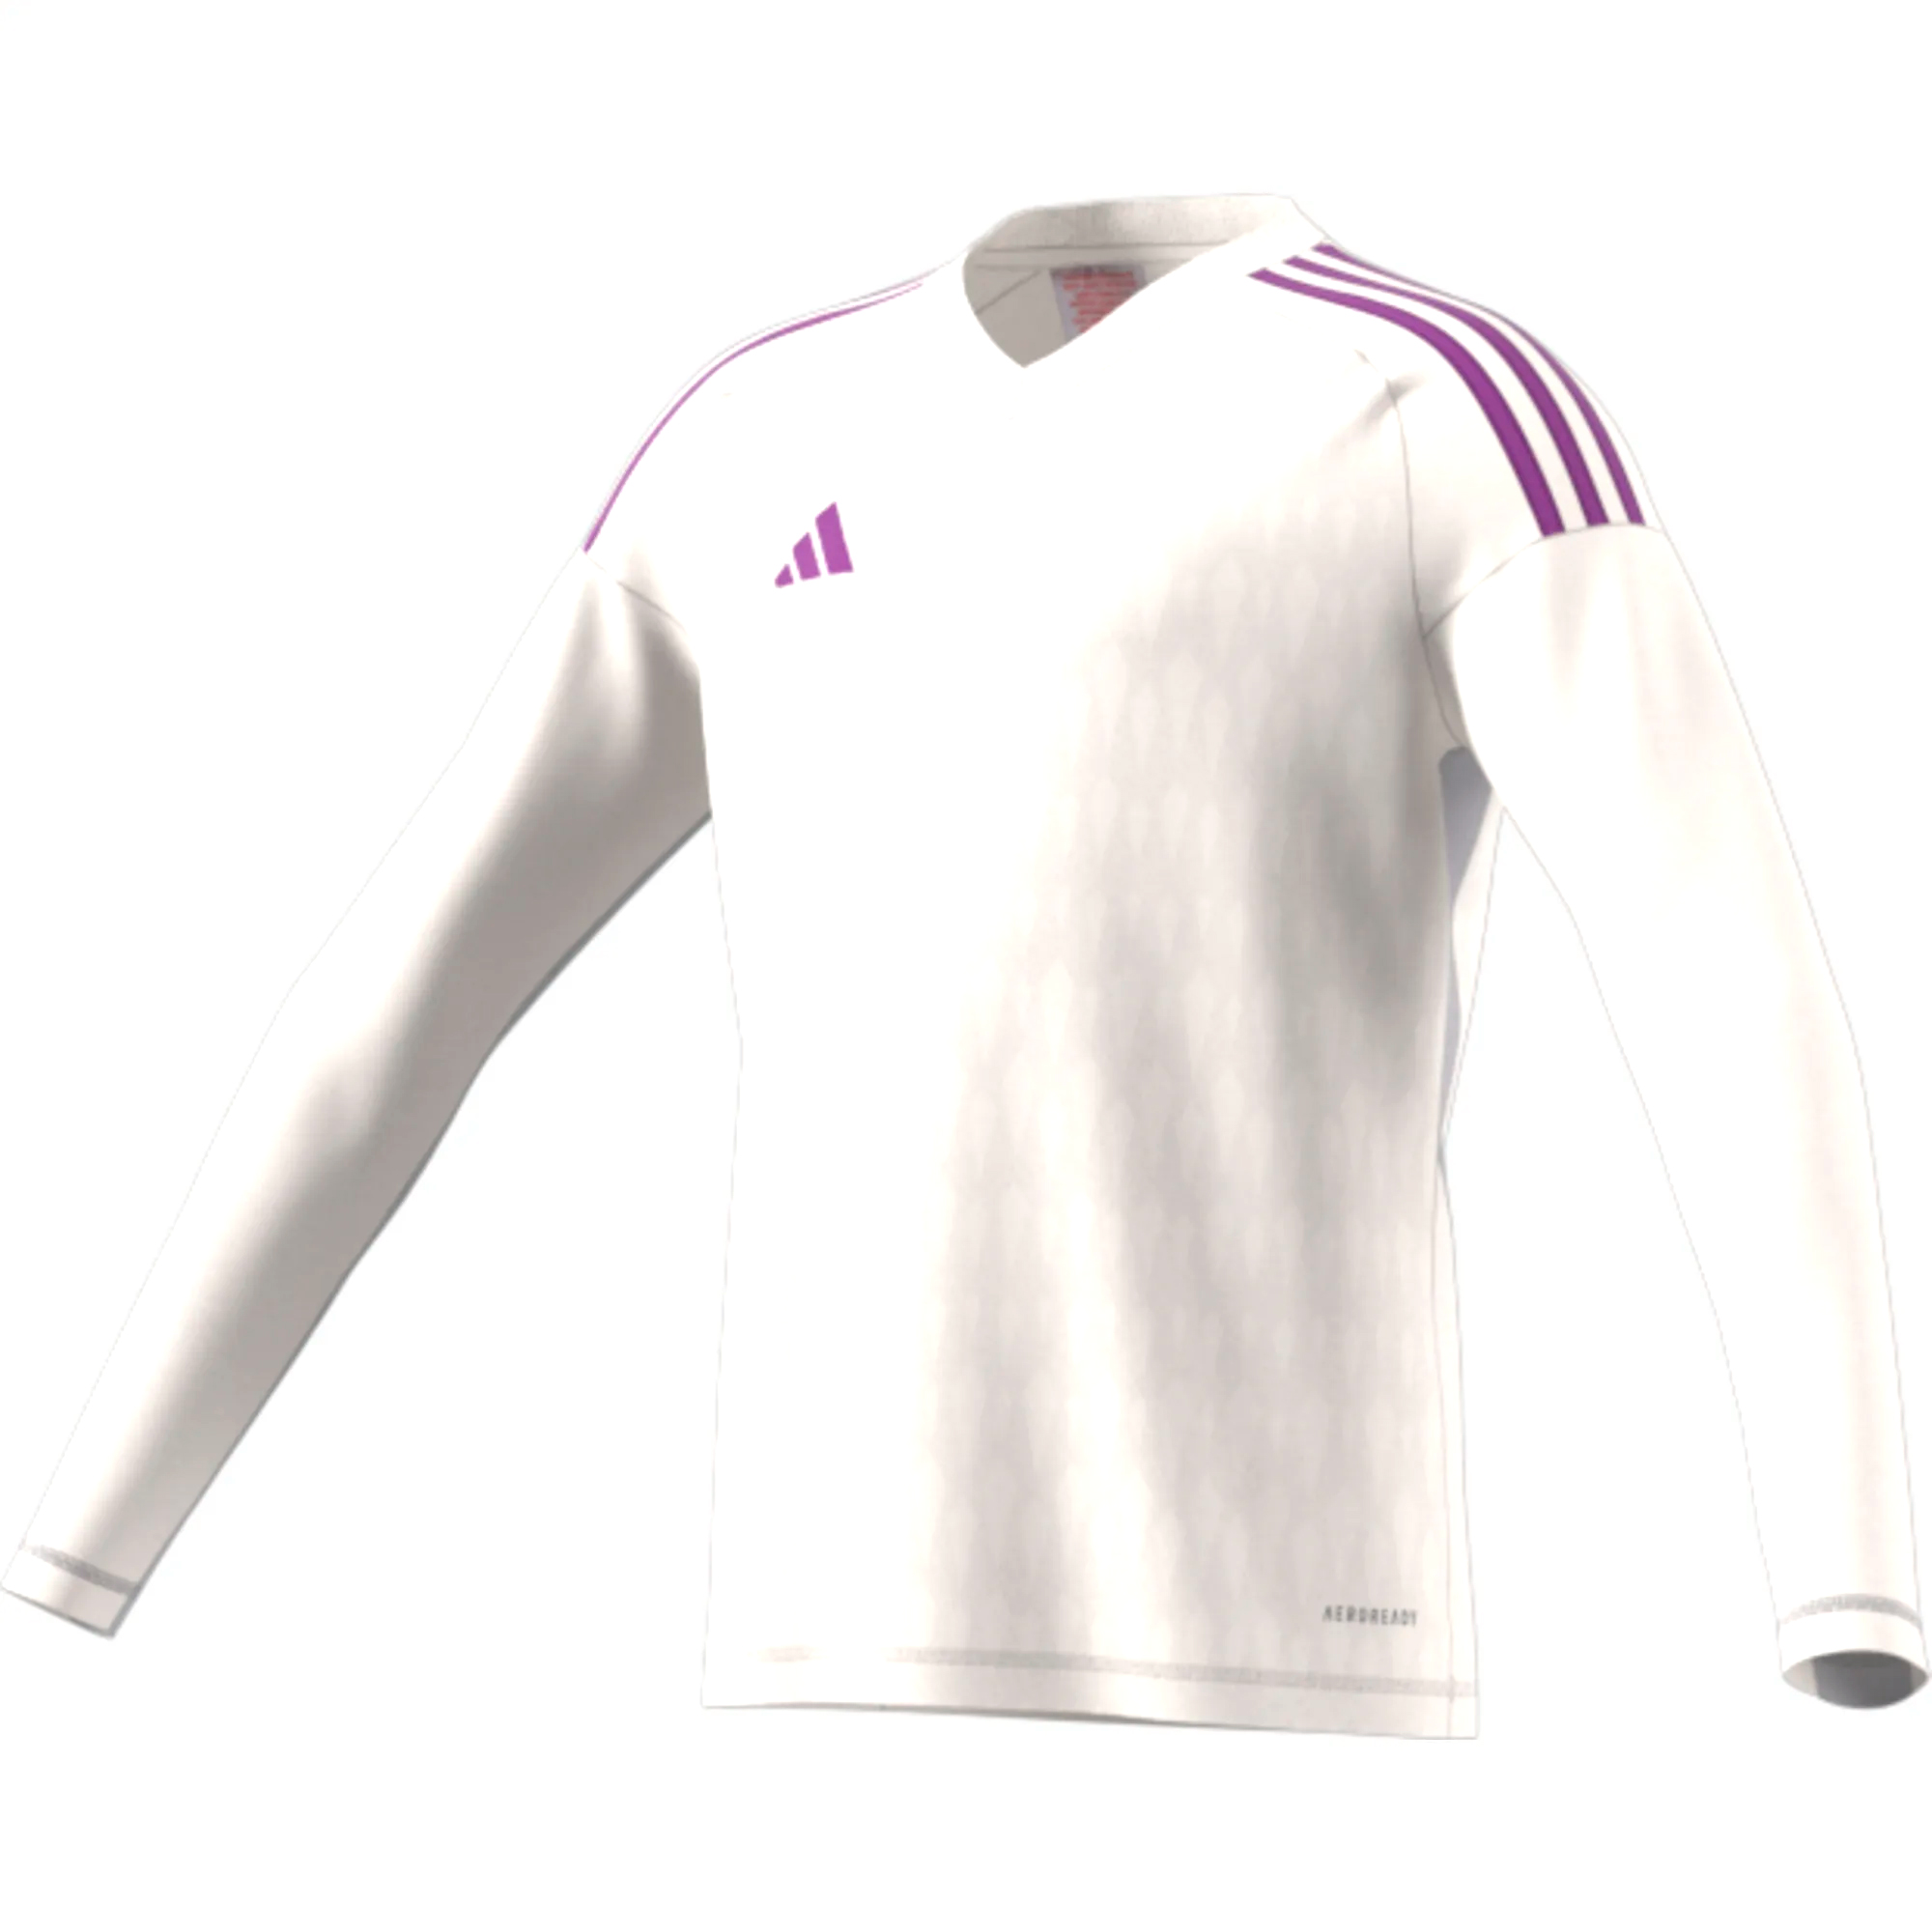 ADIDAS T23 COMPETITION GK JERSEY LS YOUTH CORE WHITE